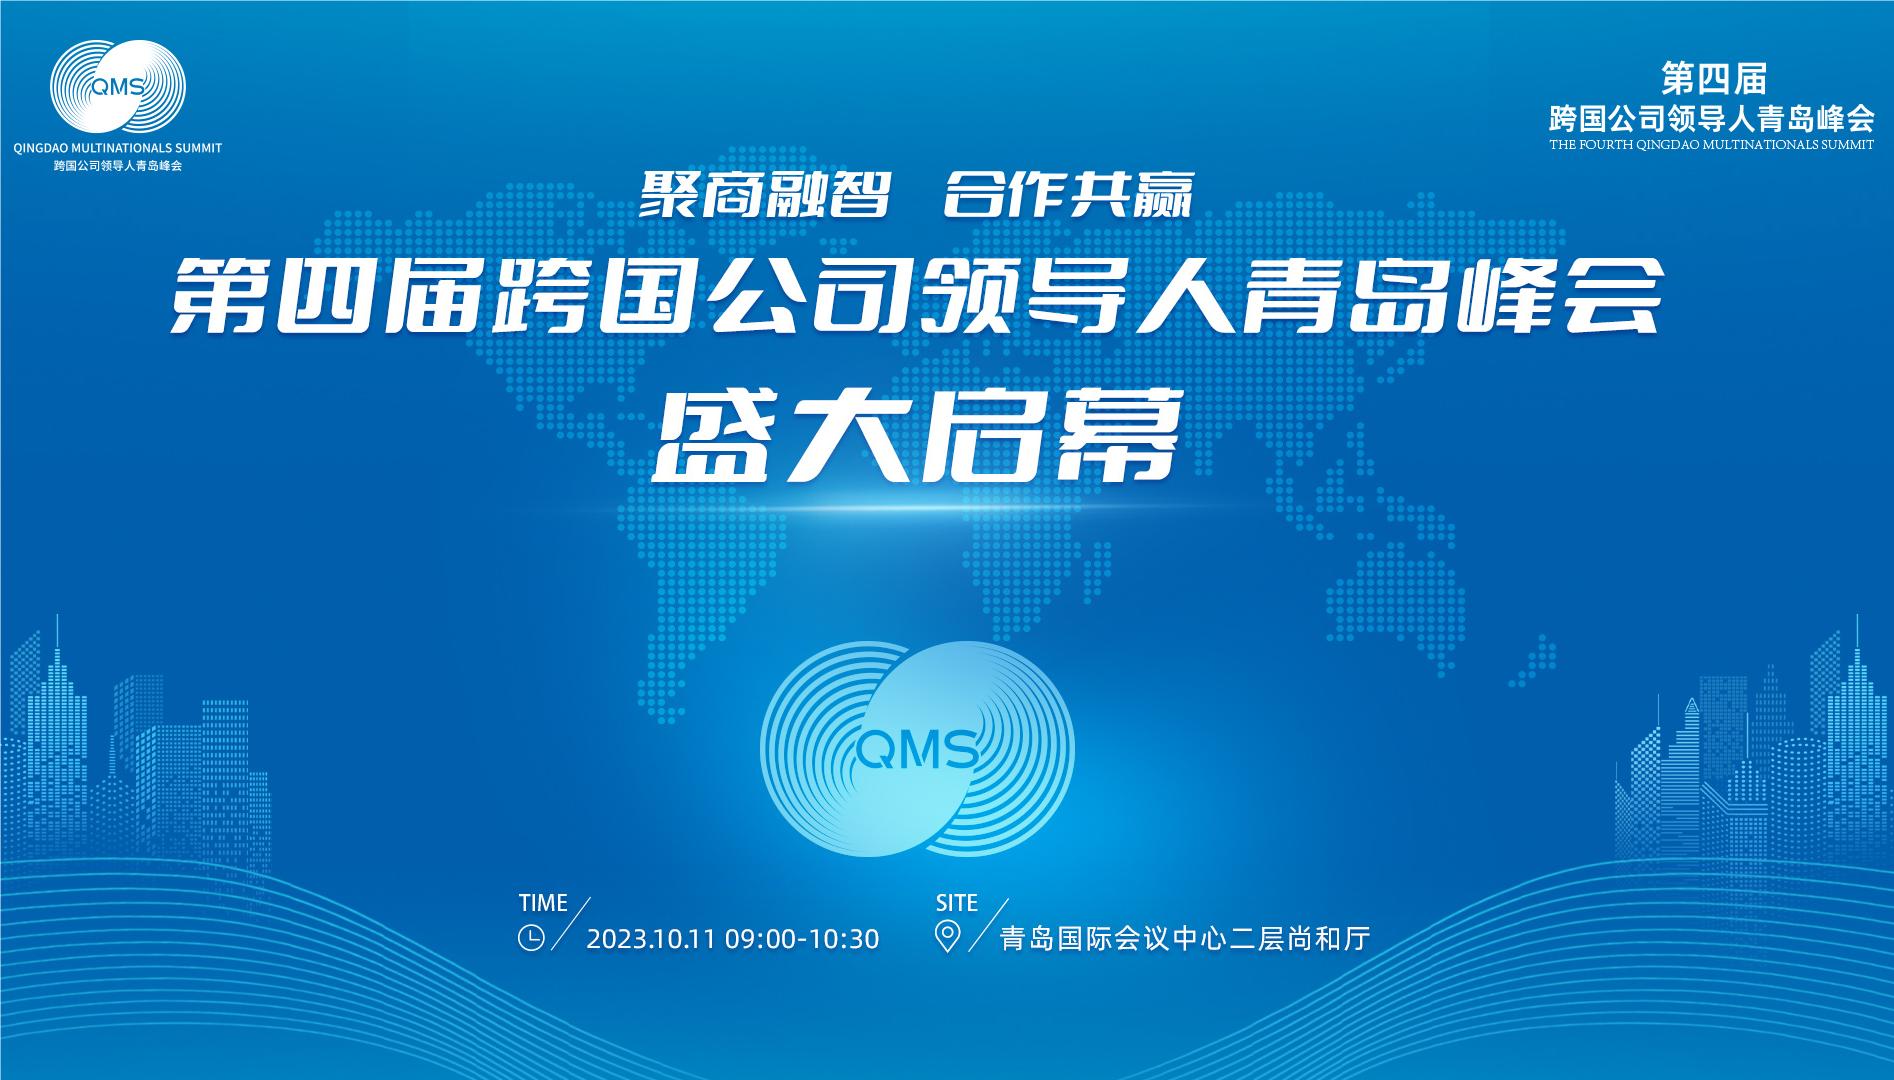 Qingdao welcomes the world at multinationals summit